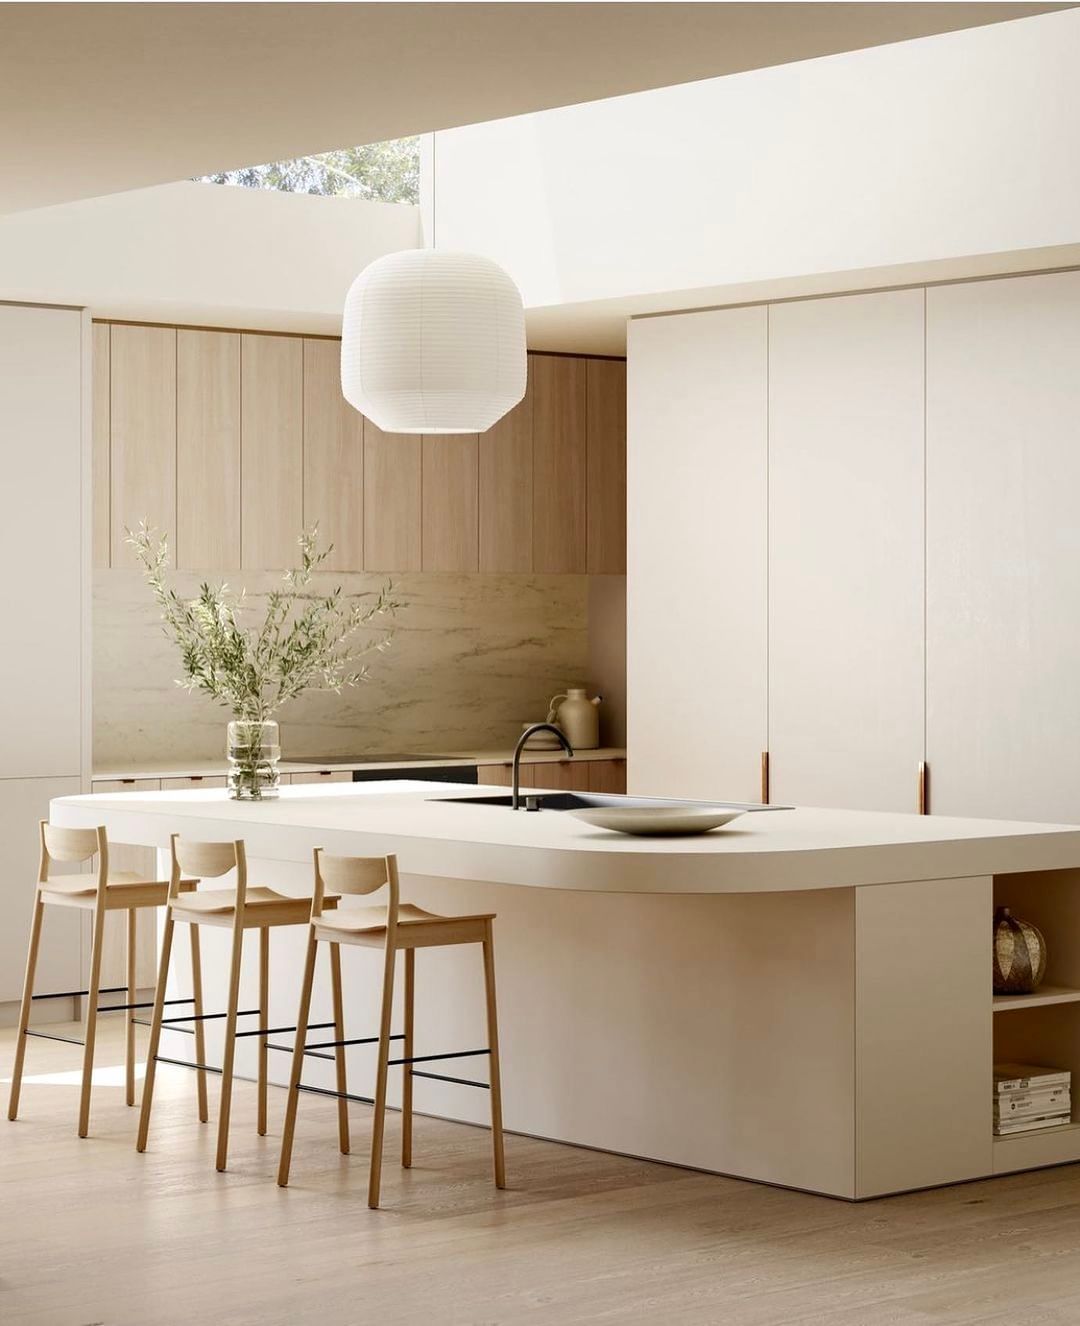 Modern Minimalist Kitchen Sleek and Simple Kitchen Design for the Contemporary Home